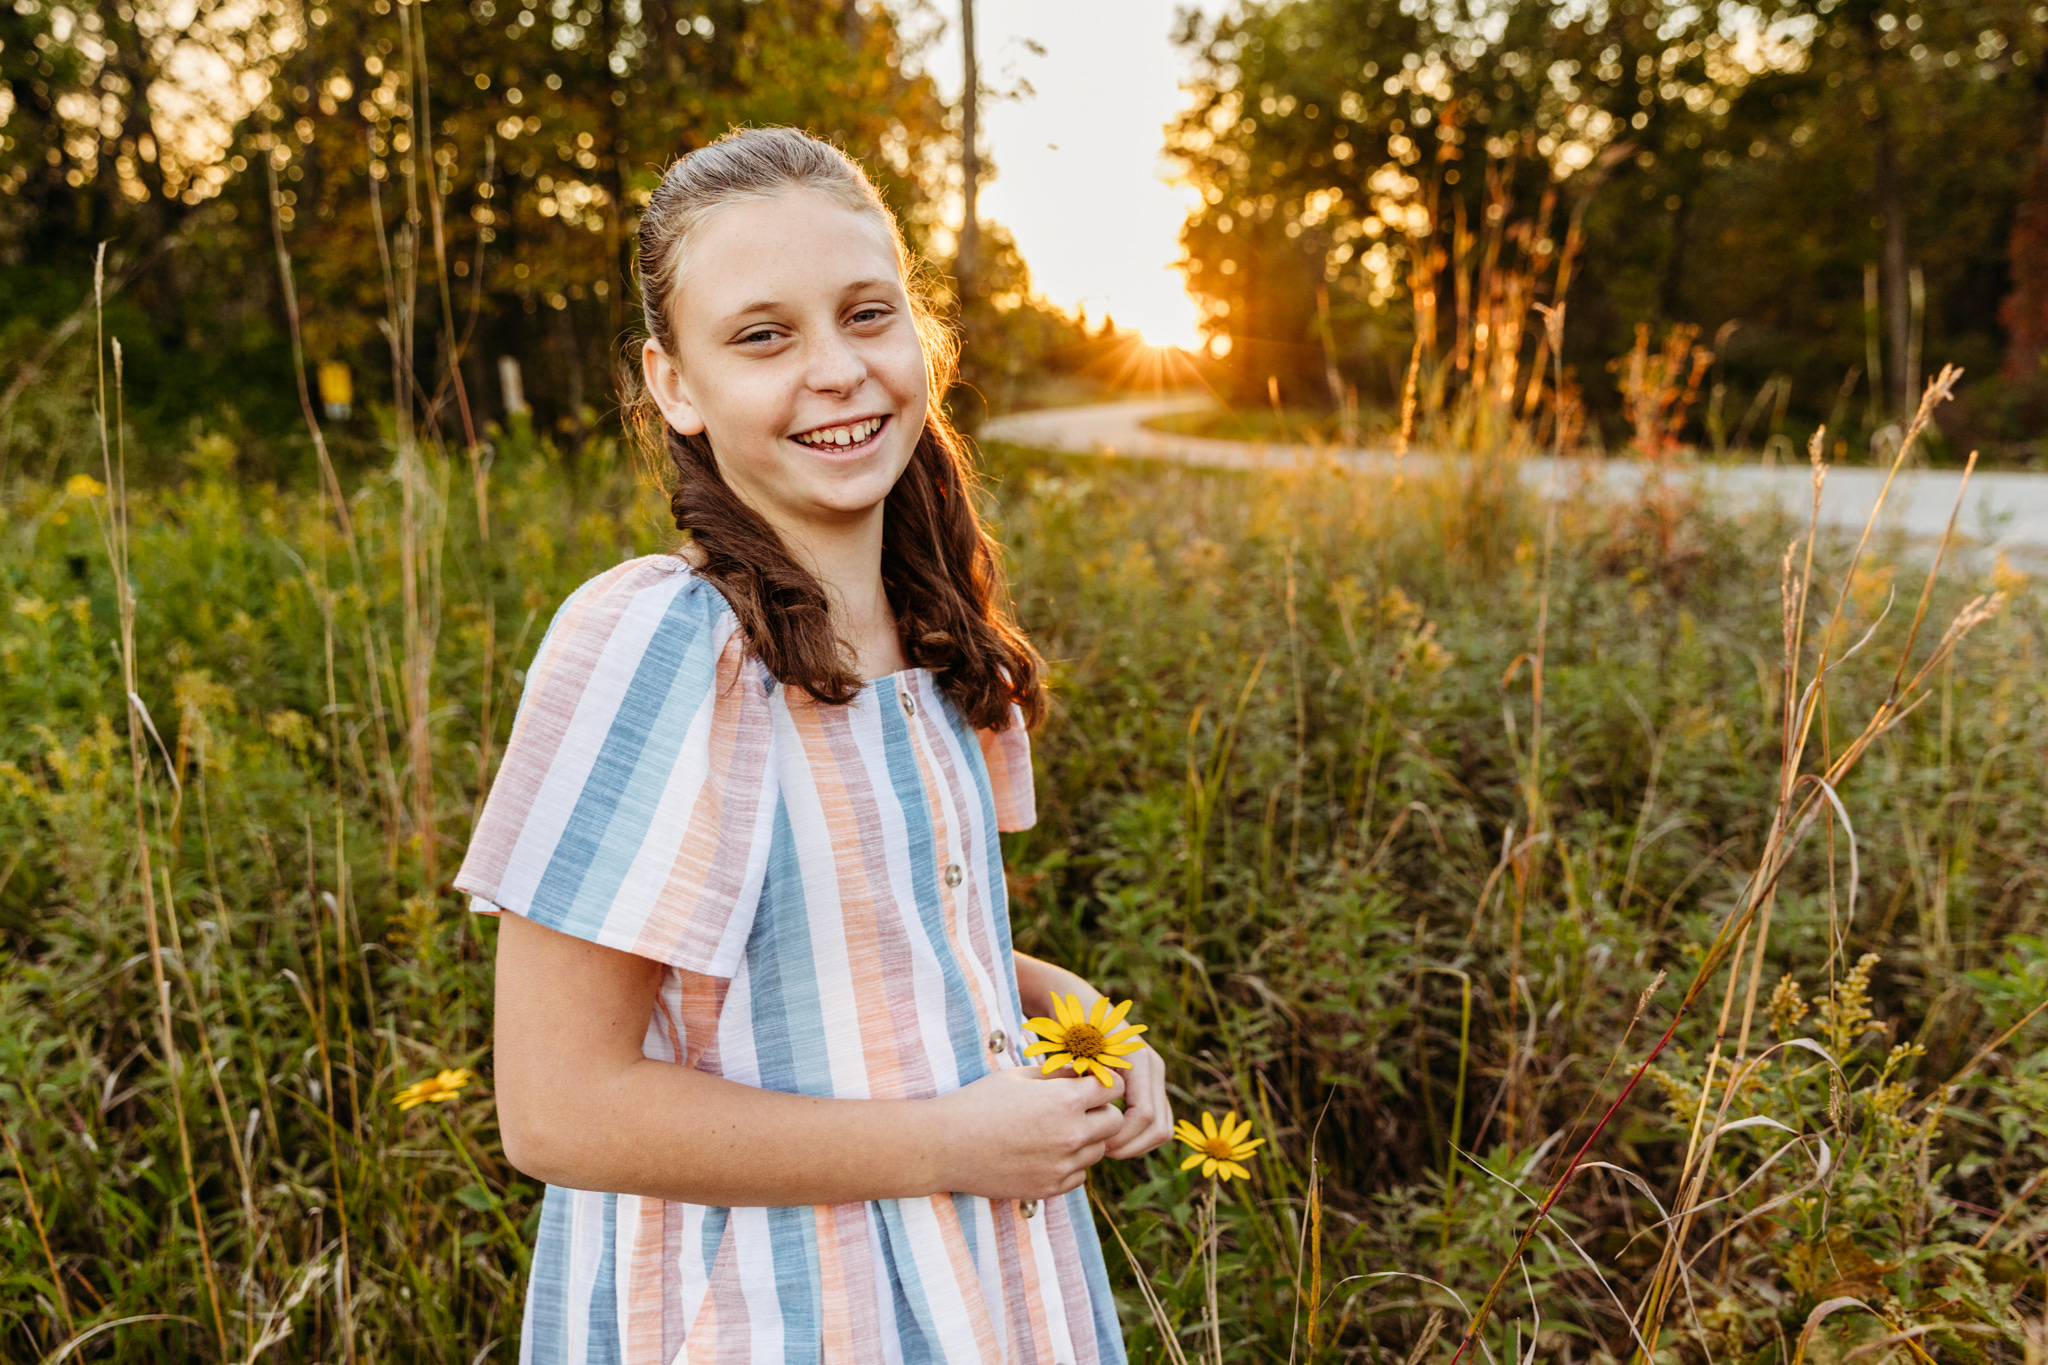 A young girl in a stripe dress picks yellow wildflowers in tall grass of a park field at sunset